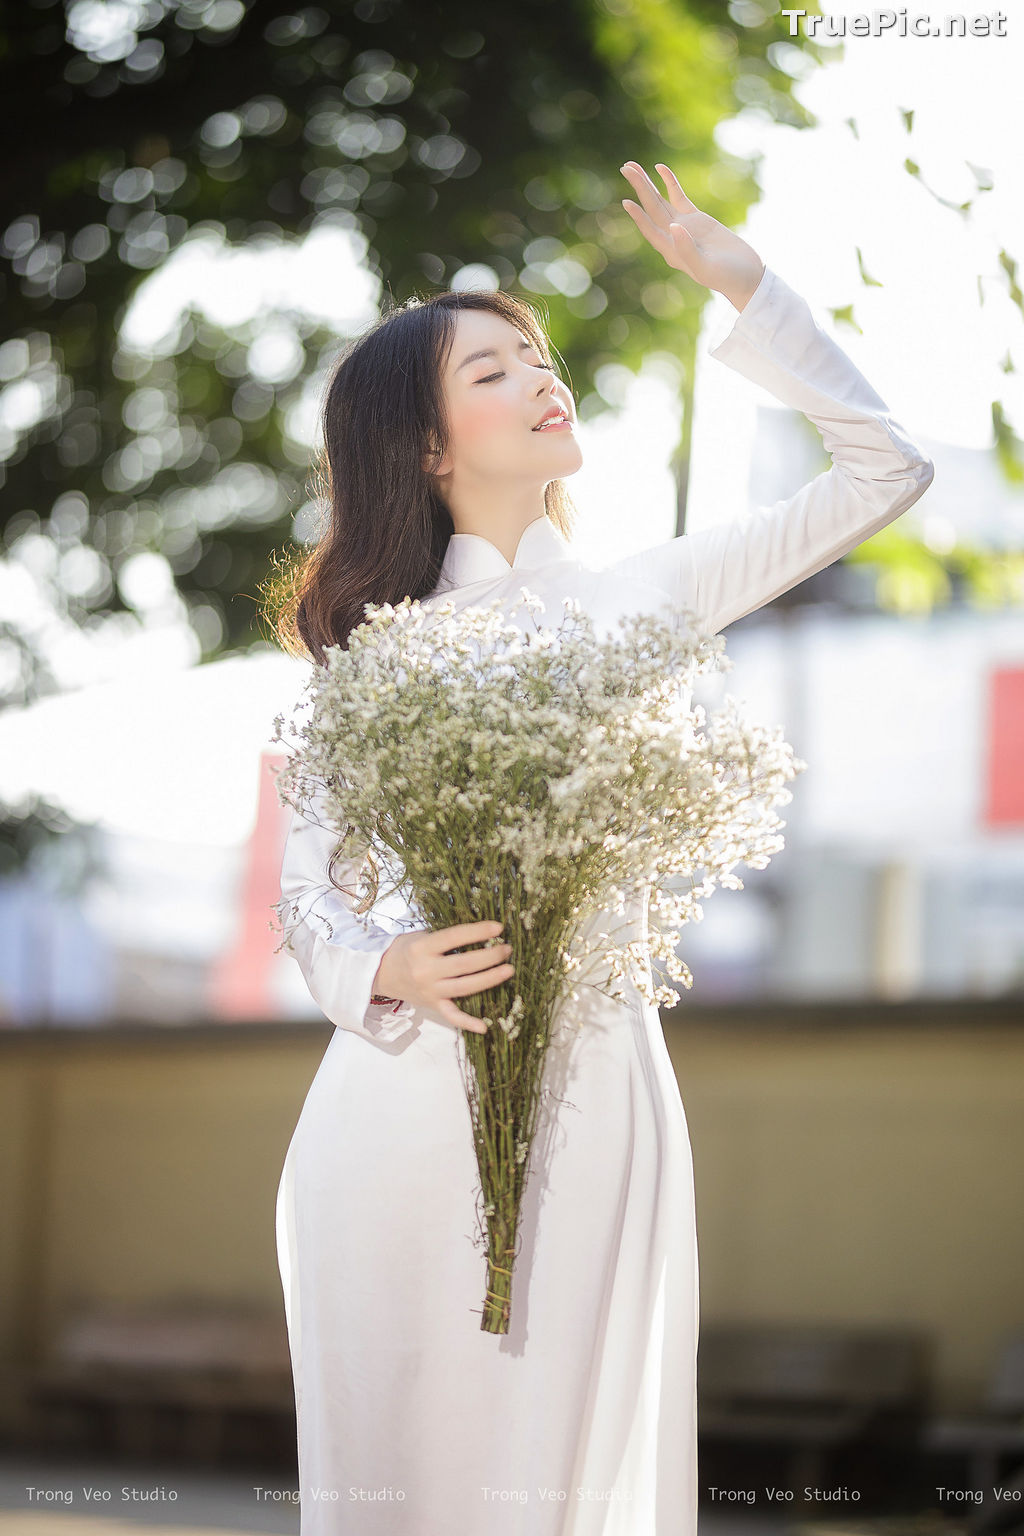 Image The Beauty of Vietnamese Girls with Traditional Dress (Ao Dai) #5 - TruePic.net - Picture-33